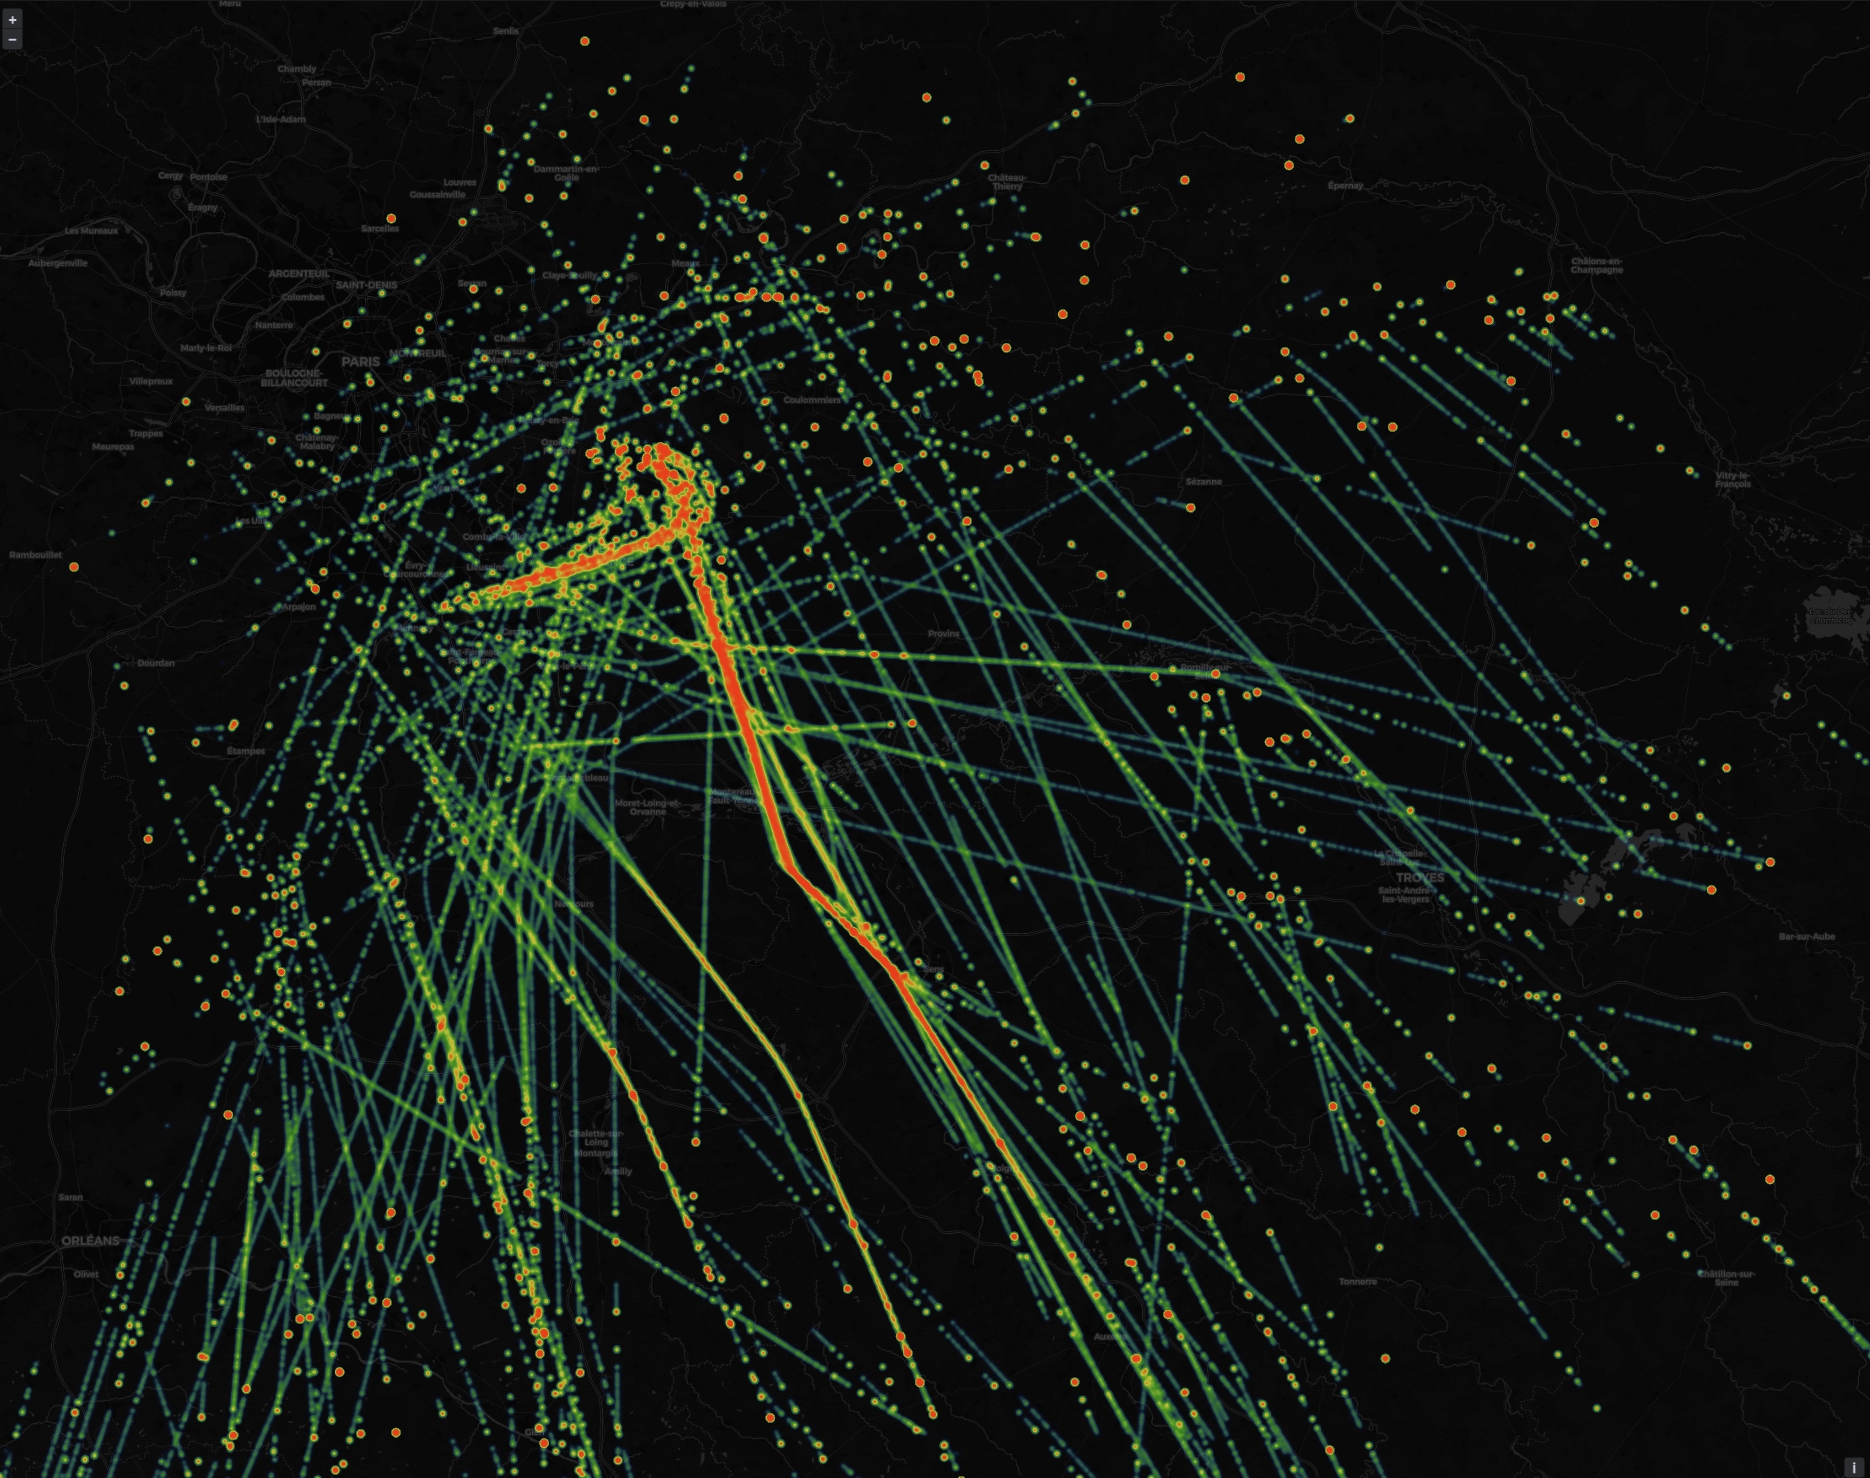 A bunch of heatmapped lines indicated flight paths over South America.